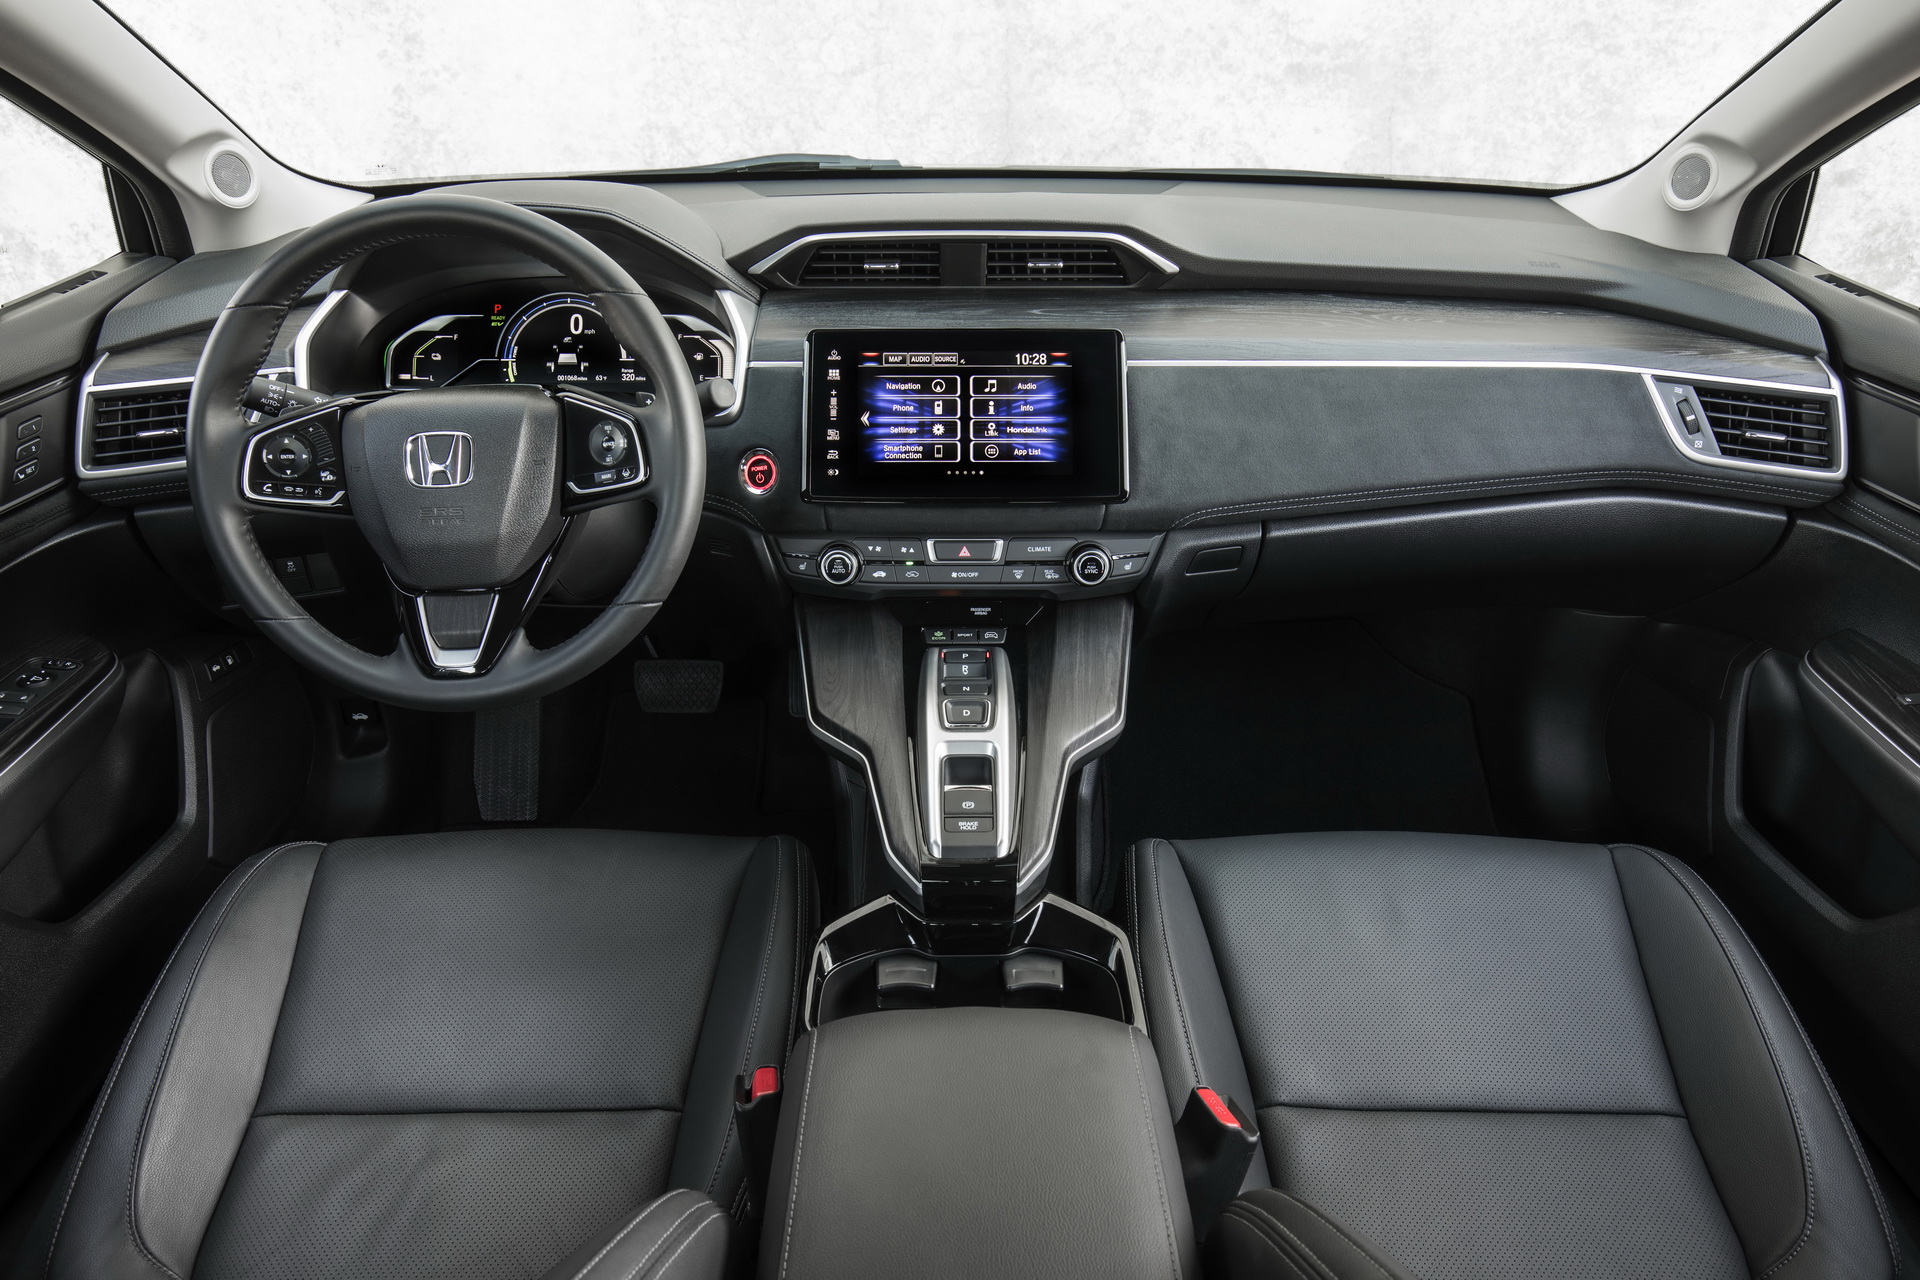 Honda Clarity Phev Gets Updated Acoustic Alert System So Bypassers Know It S Coming Carscoops